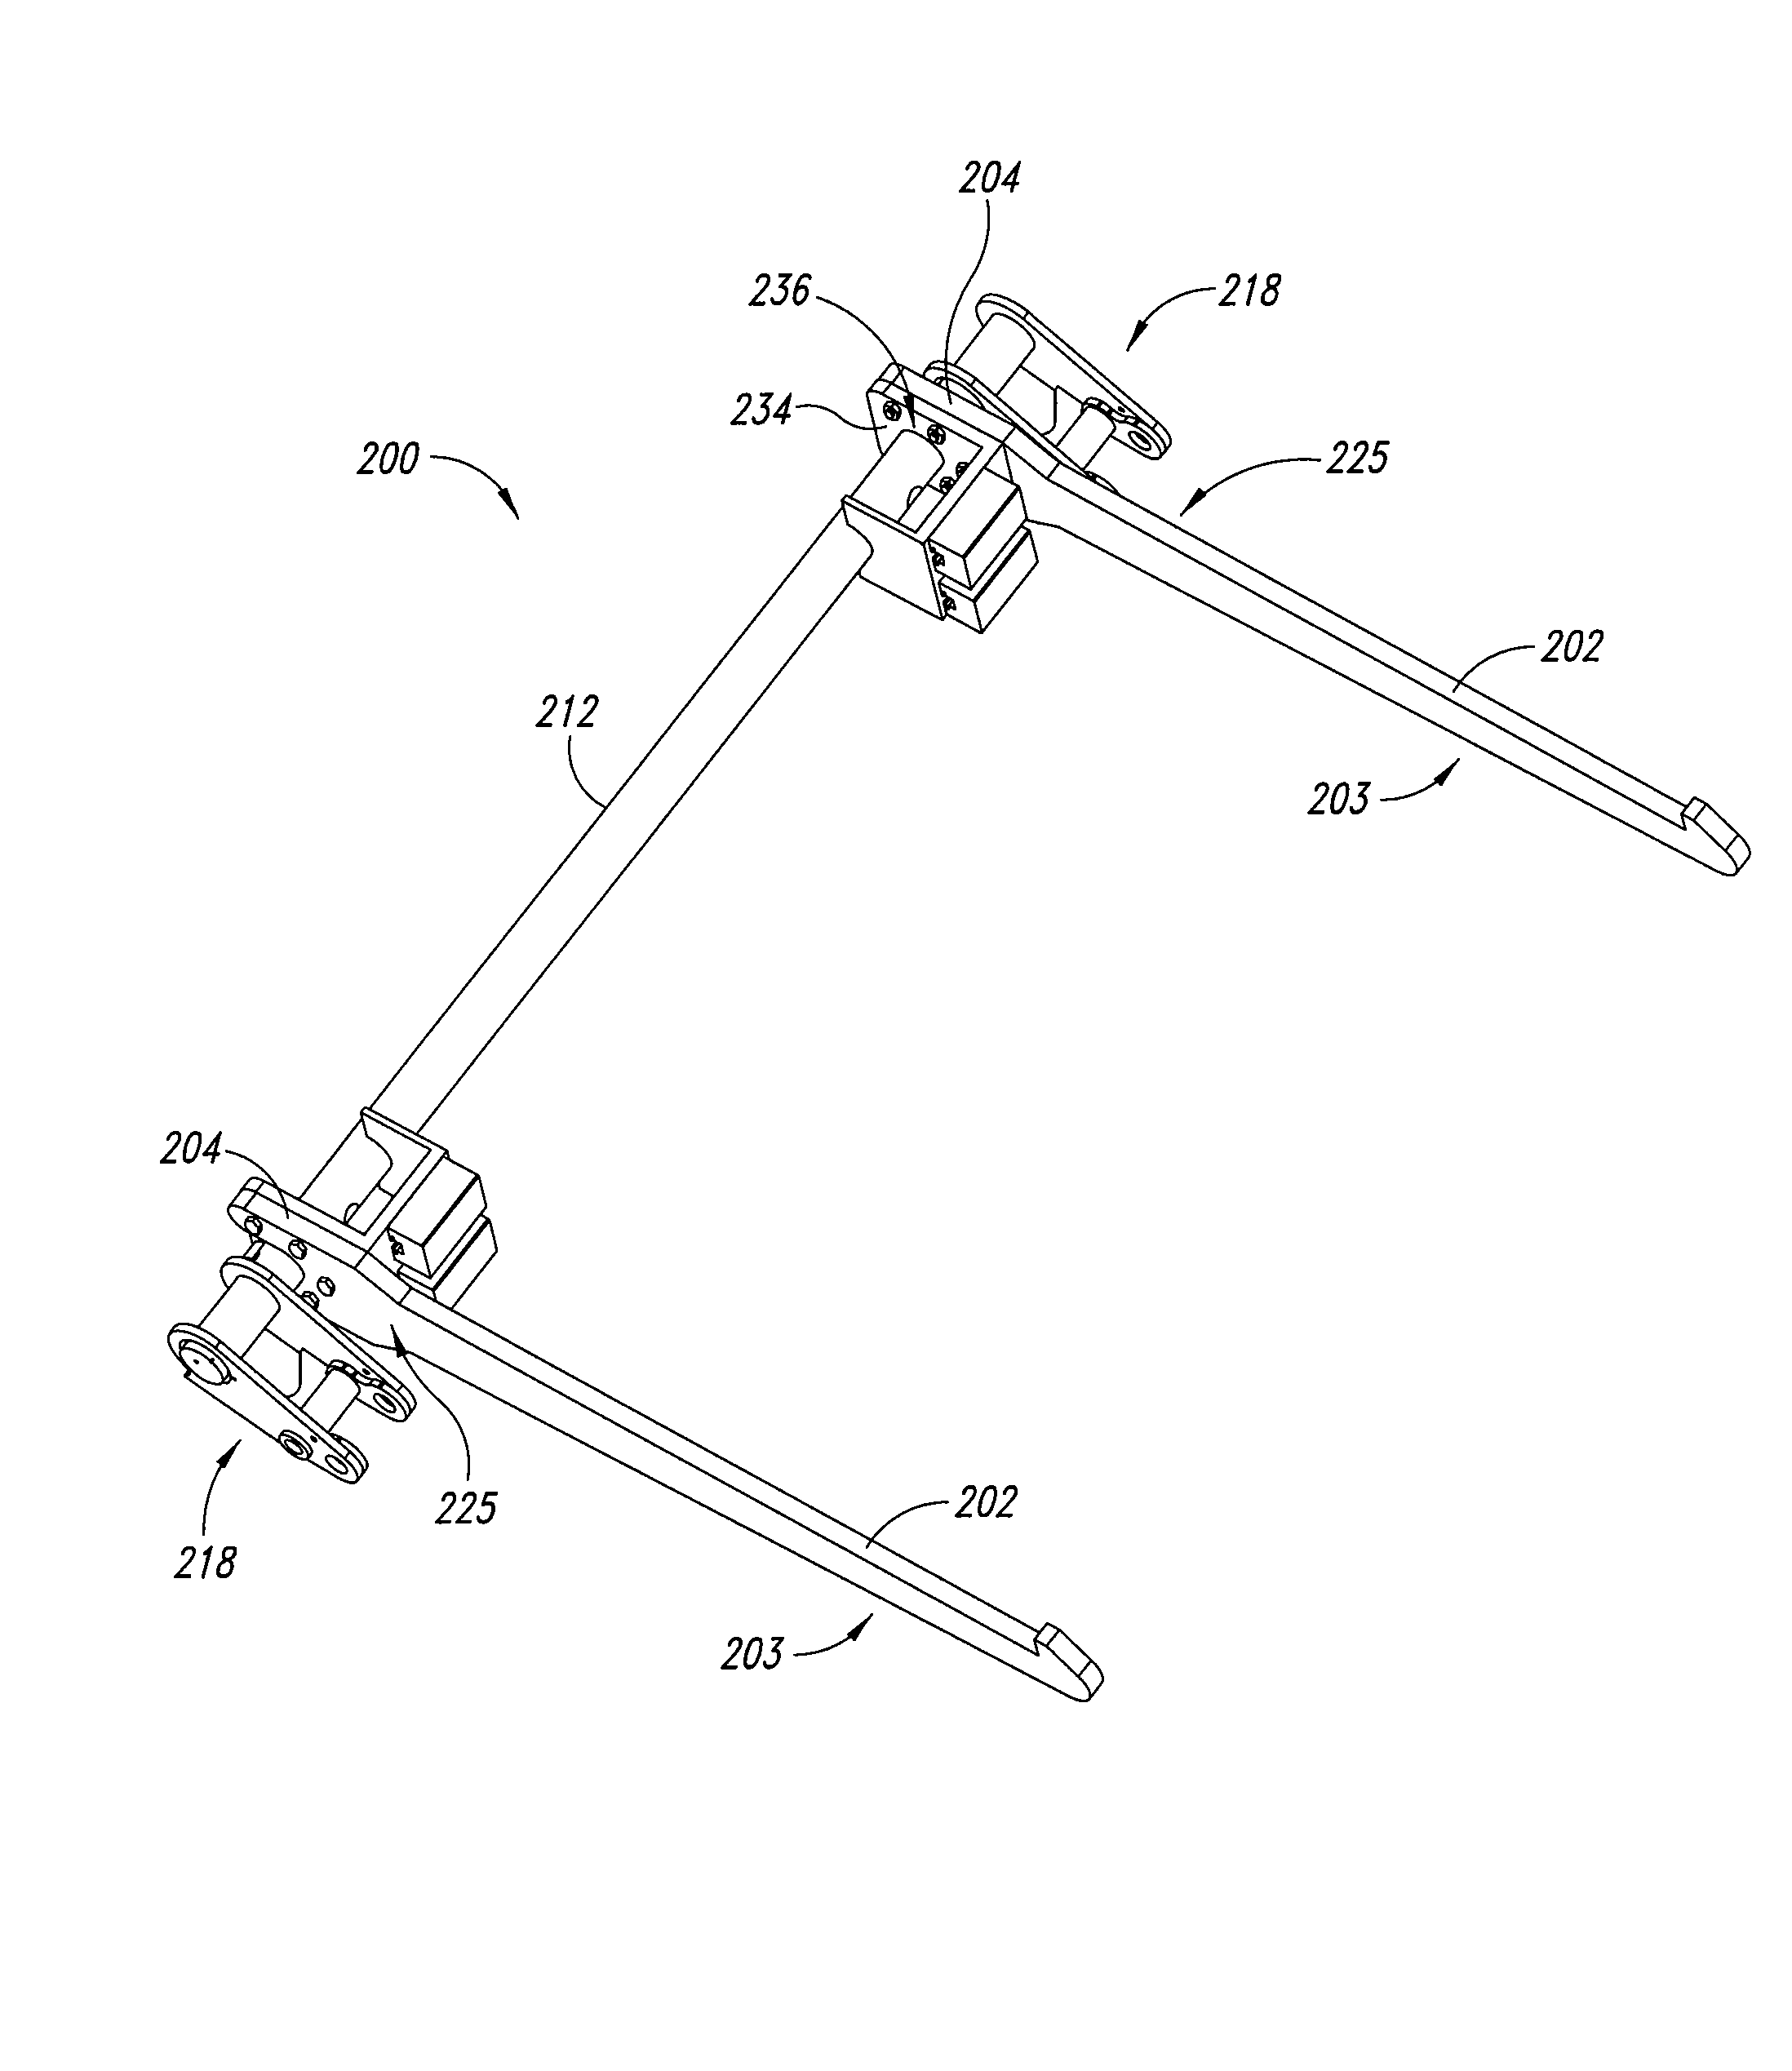 Load lift system and method